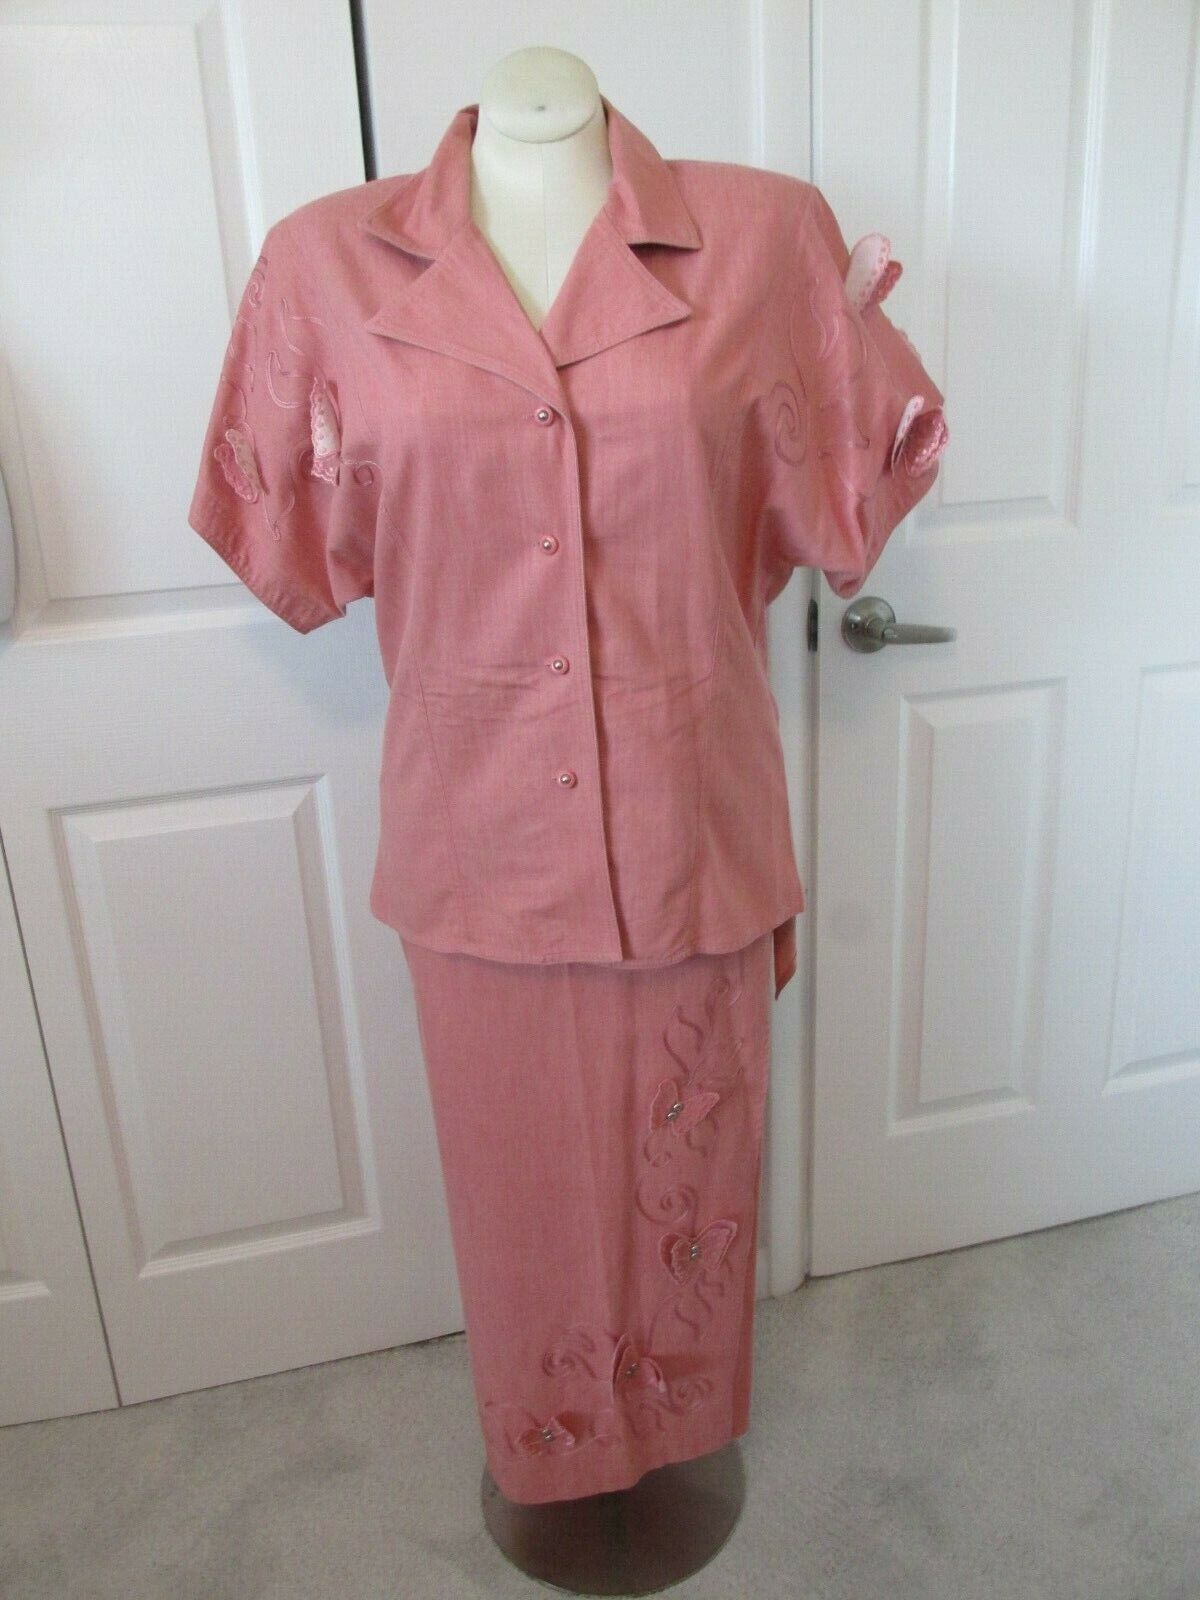 Primary image for HOWARD WOLF Vintage Pink Wrap Skirt Suit Embroidered Appliques 12 Butterflies EC